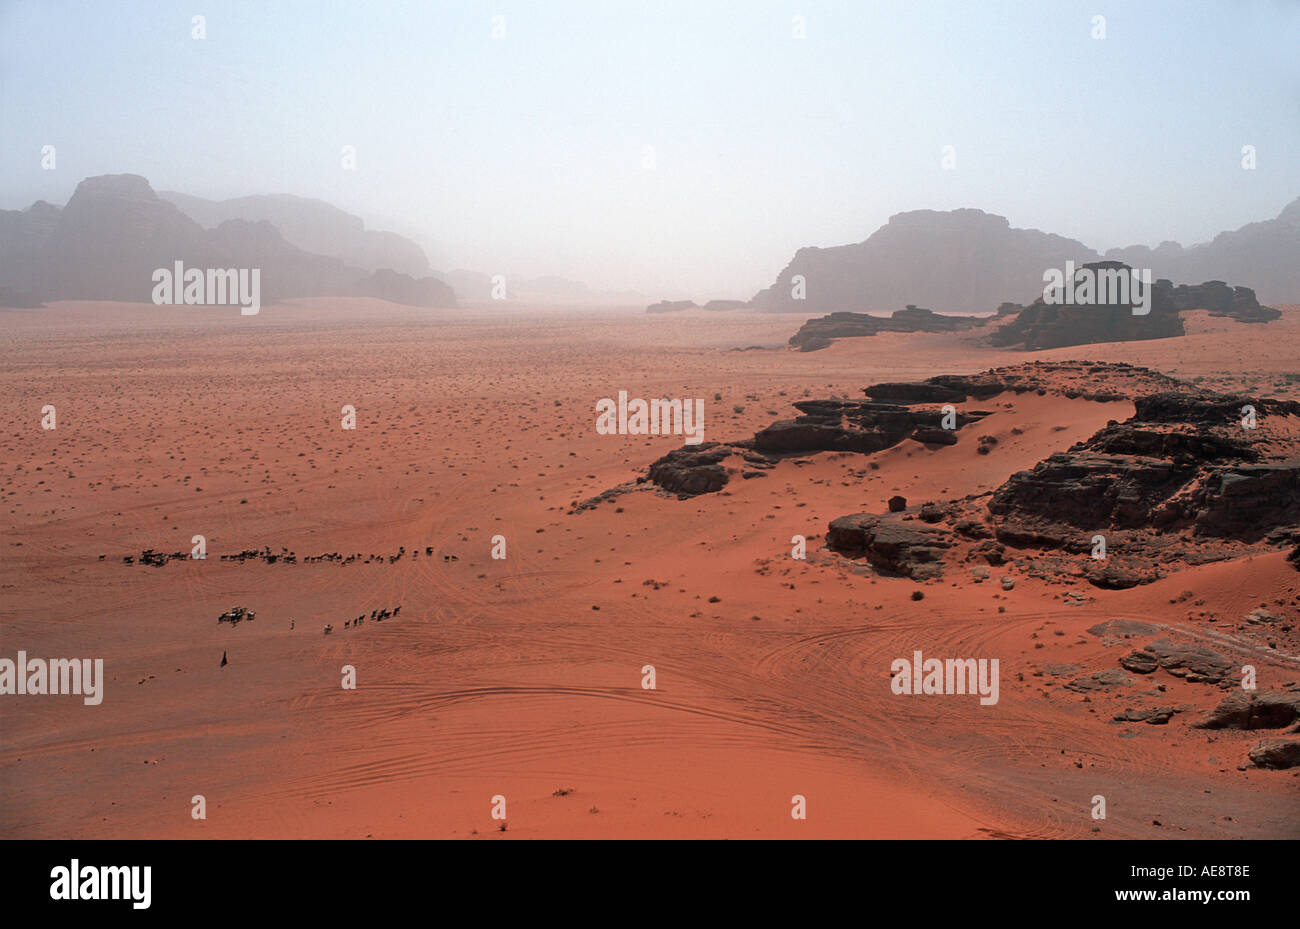 Red sand floor of the desert with rocky outcrops called Jebels in the distance Wadi Rum Jordan Stock Photo